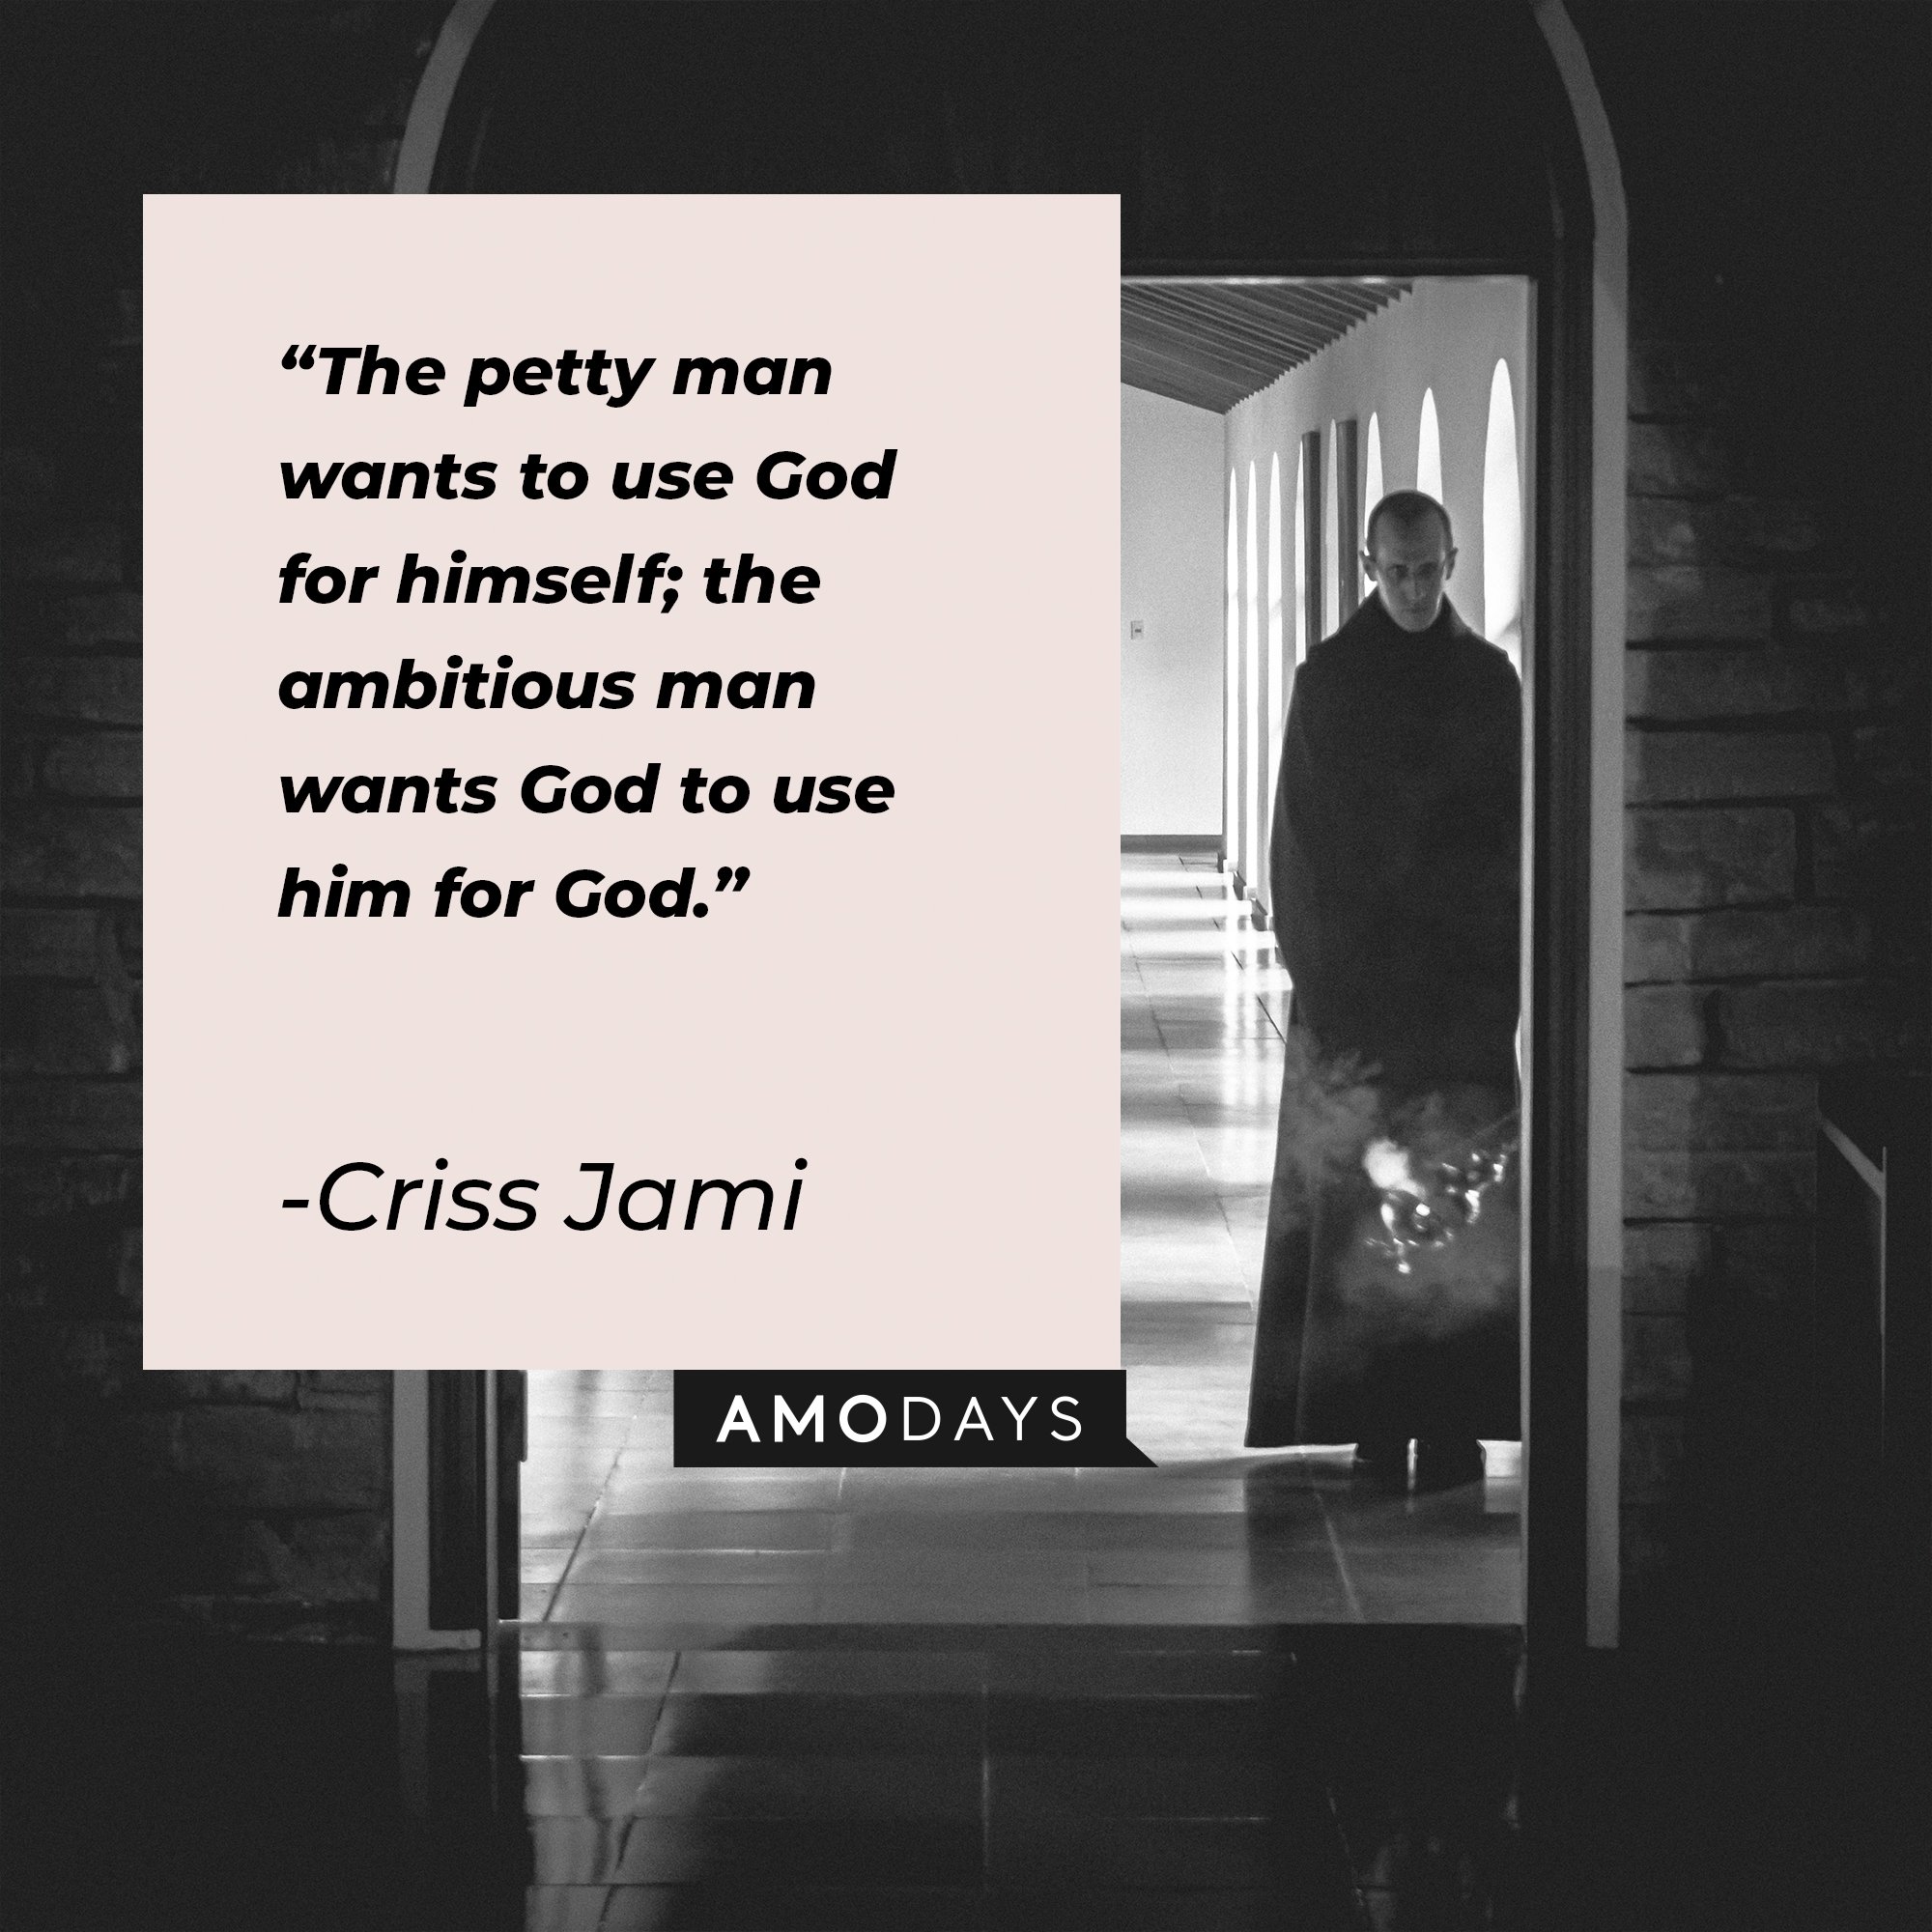 Criss Jami's quote: "The petty man wants to use God for himself; the ambitious man wants God to use him for God." | Image: AmoDays